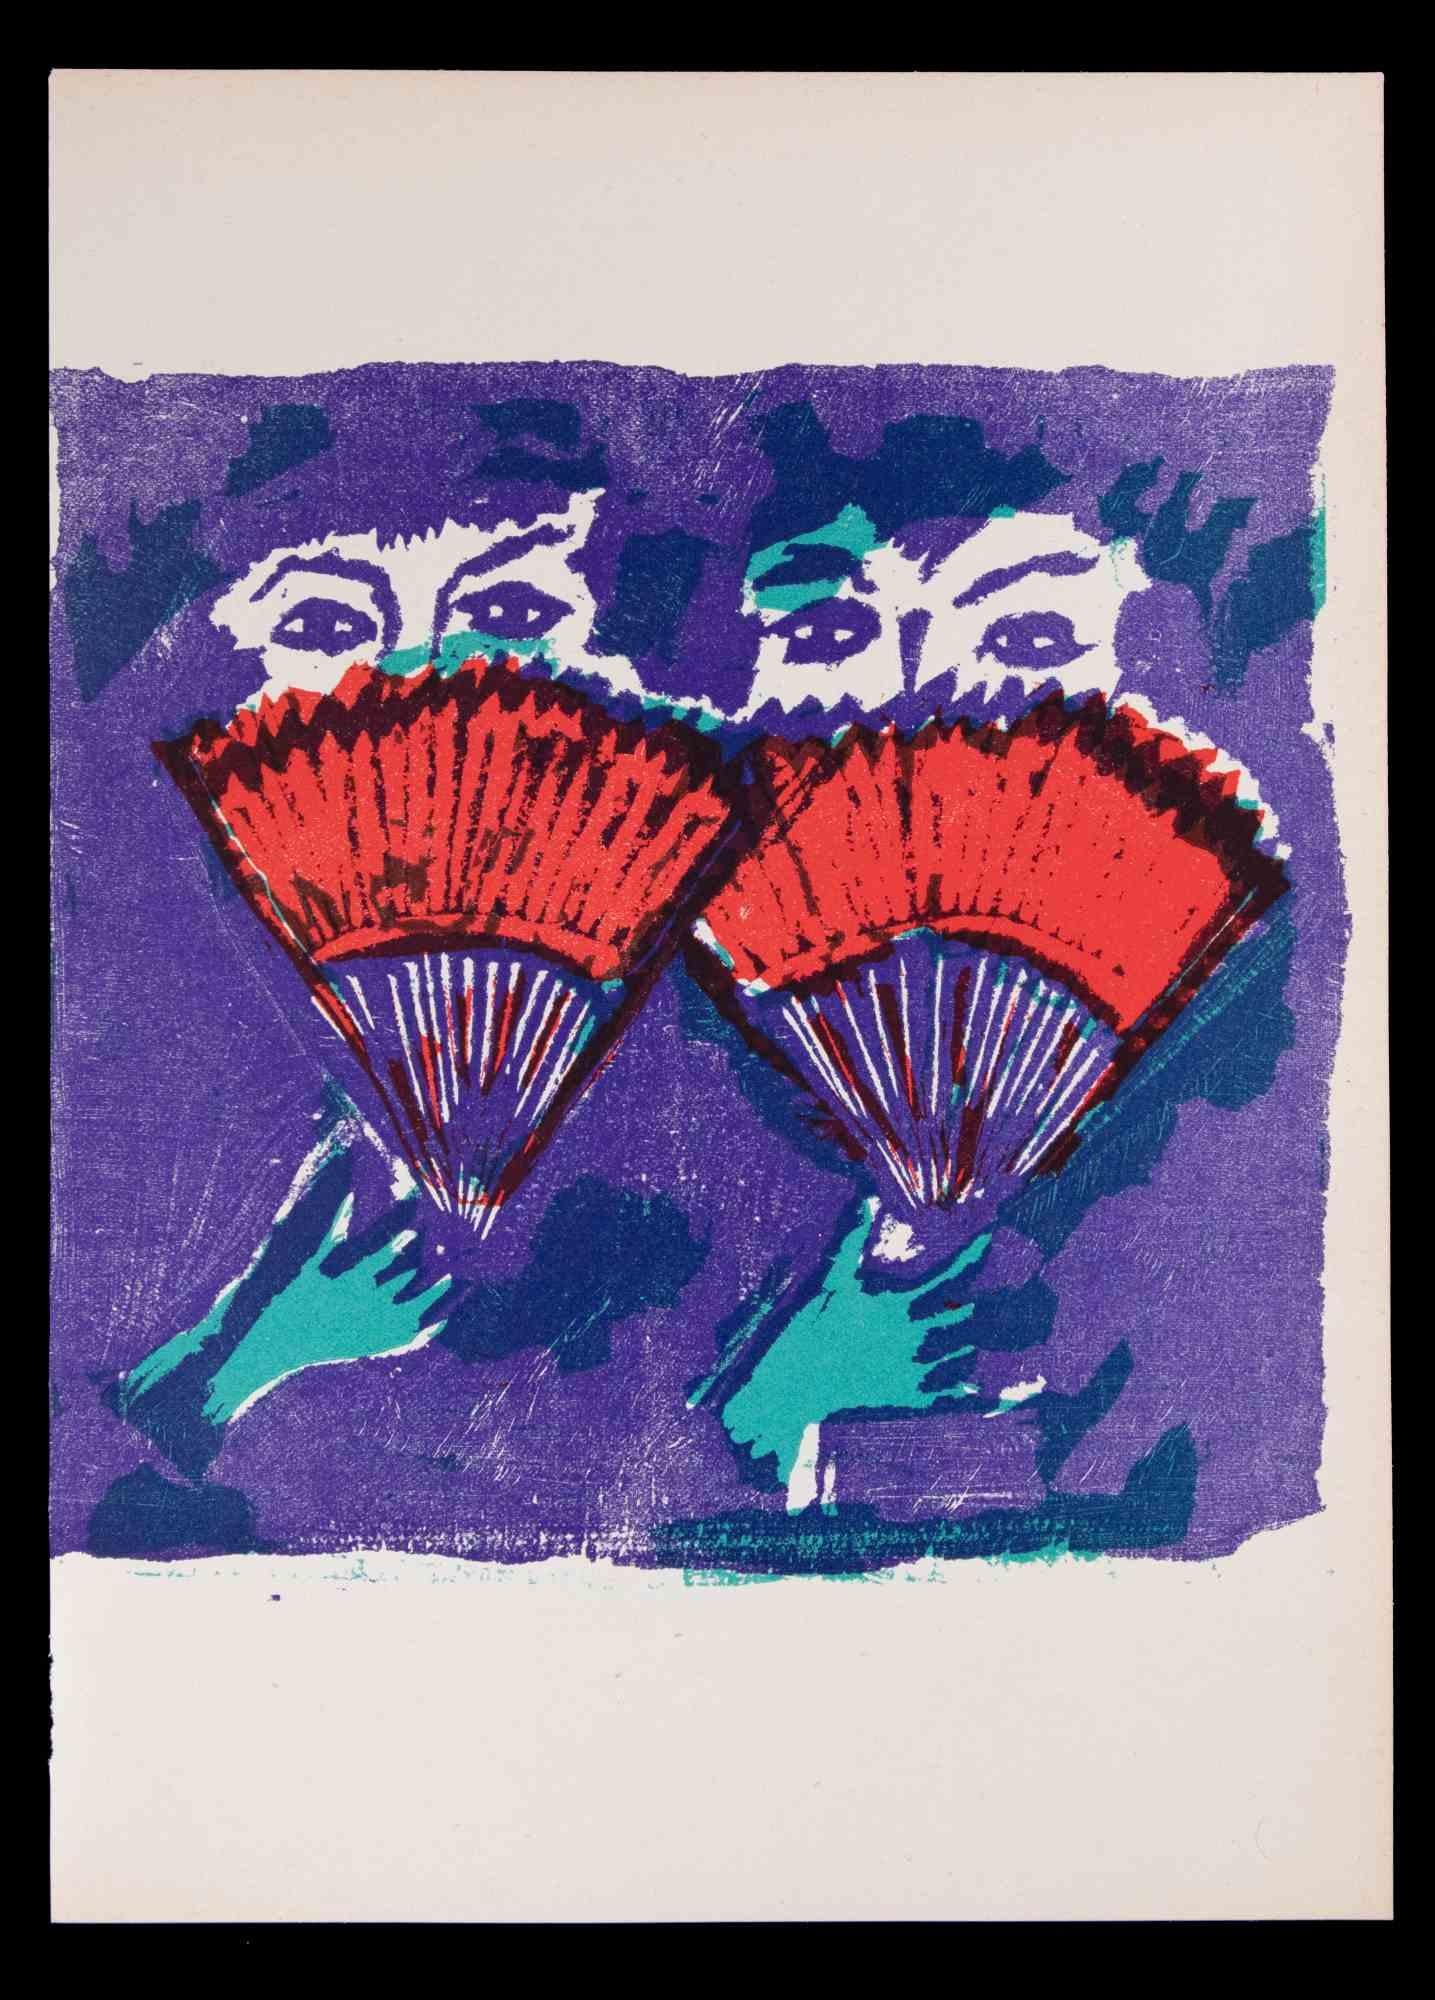 Hand Fans is an Original Linocut Print realized by Mino Maccari in 1951.

Very good condition, not signed.

Mino Maccari (1898-1989) was an Italian writer, painter, engraver and journalist, winner the Feltrinelli Prize for painting on 1963. For his